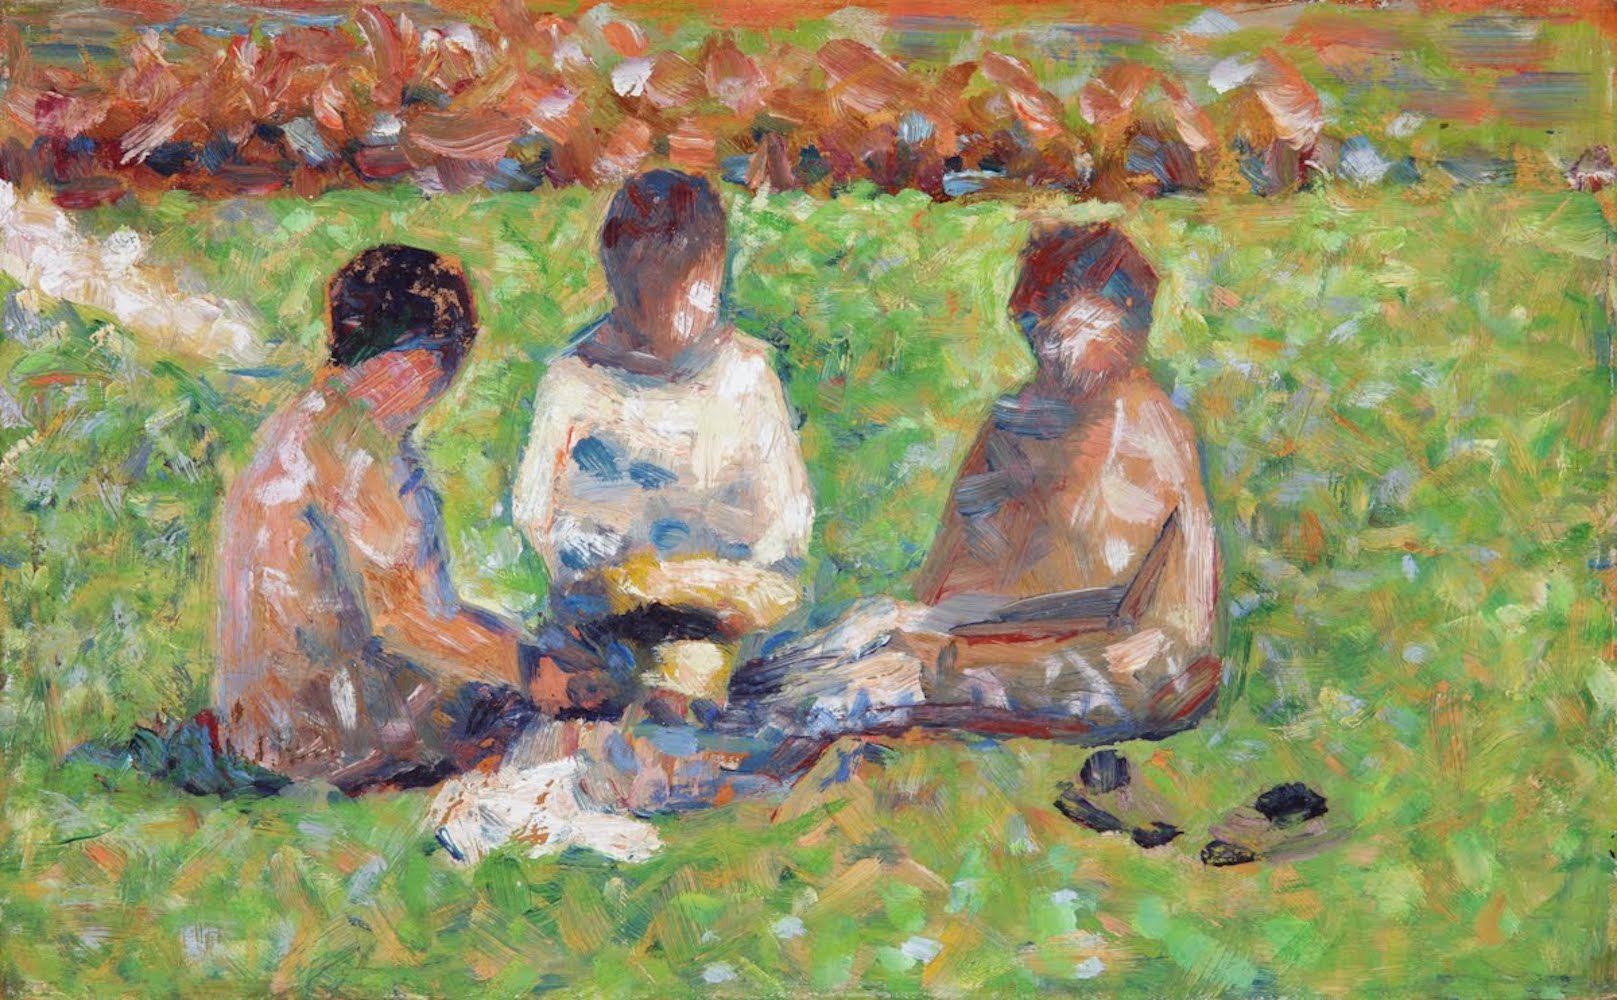 The Picnic by Georges Seurat - c. 1885 - 15.9 × 25.4 cm Dixon Gallery and Gardens